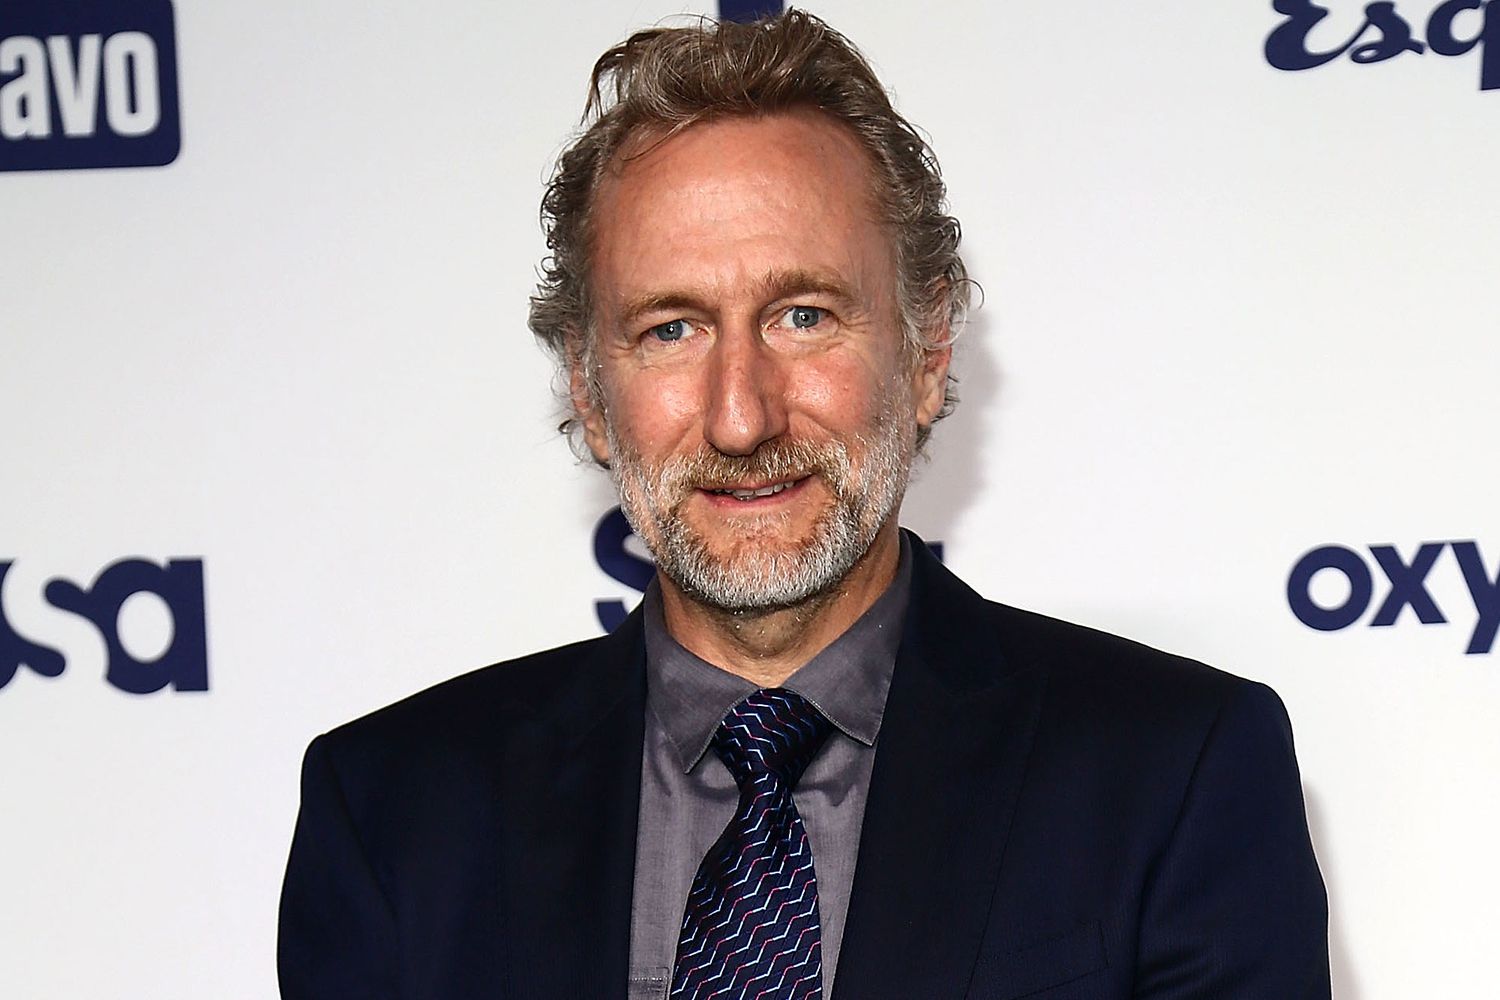 Brian Henson wearing a black suit